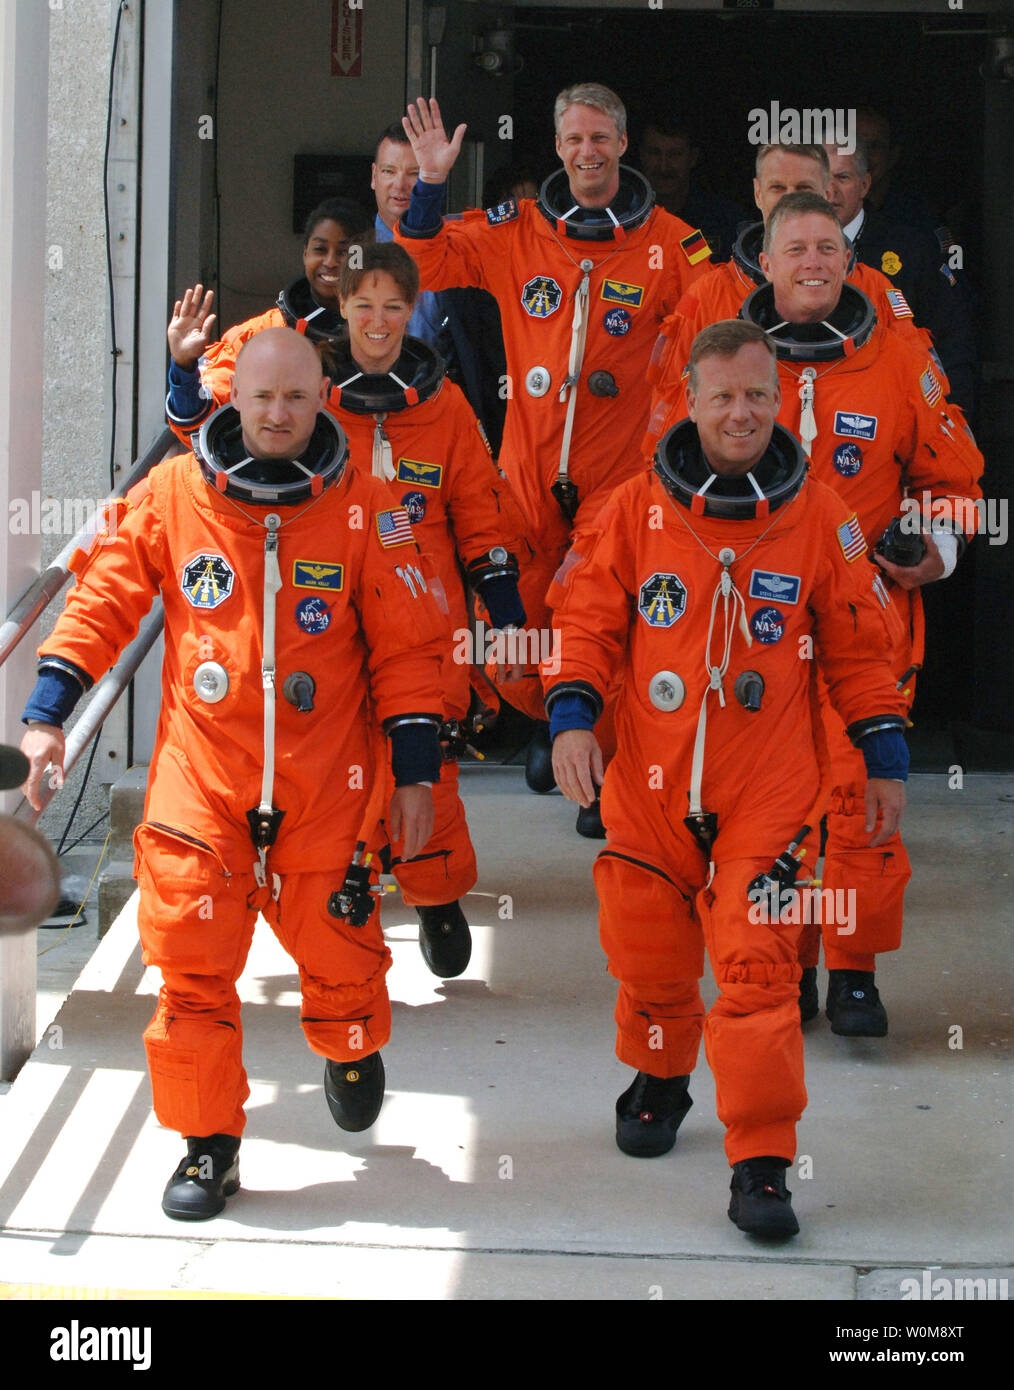 Commander Steven Lindsey (R) and Pilot Mark Kelly (L) lead Mission Specialists  Lisa Nowak (2nd Row,L), Michael Fossum (2nd row,R), Stephanie Wilson (3rd Row,L), Piers Sellers, of England (3rd Row,R), and Thomas Reiter (rear) of Germany, walk out of the Operations and Checkout Building to board the NASA Astrovan to board the Space Shuttle Discovery for mission STS-121 at Cape Canaveral, Florida on July 1, 2006.  (UPI Photo/Pat Benic) Stock Photo